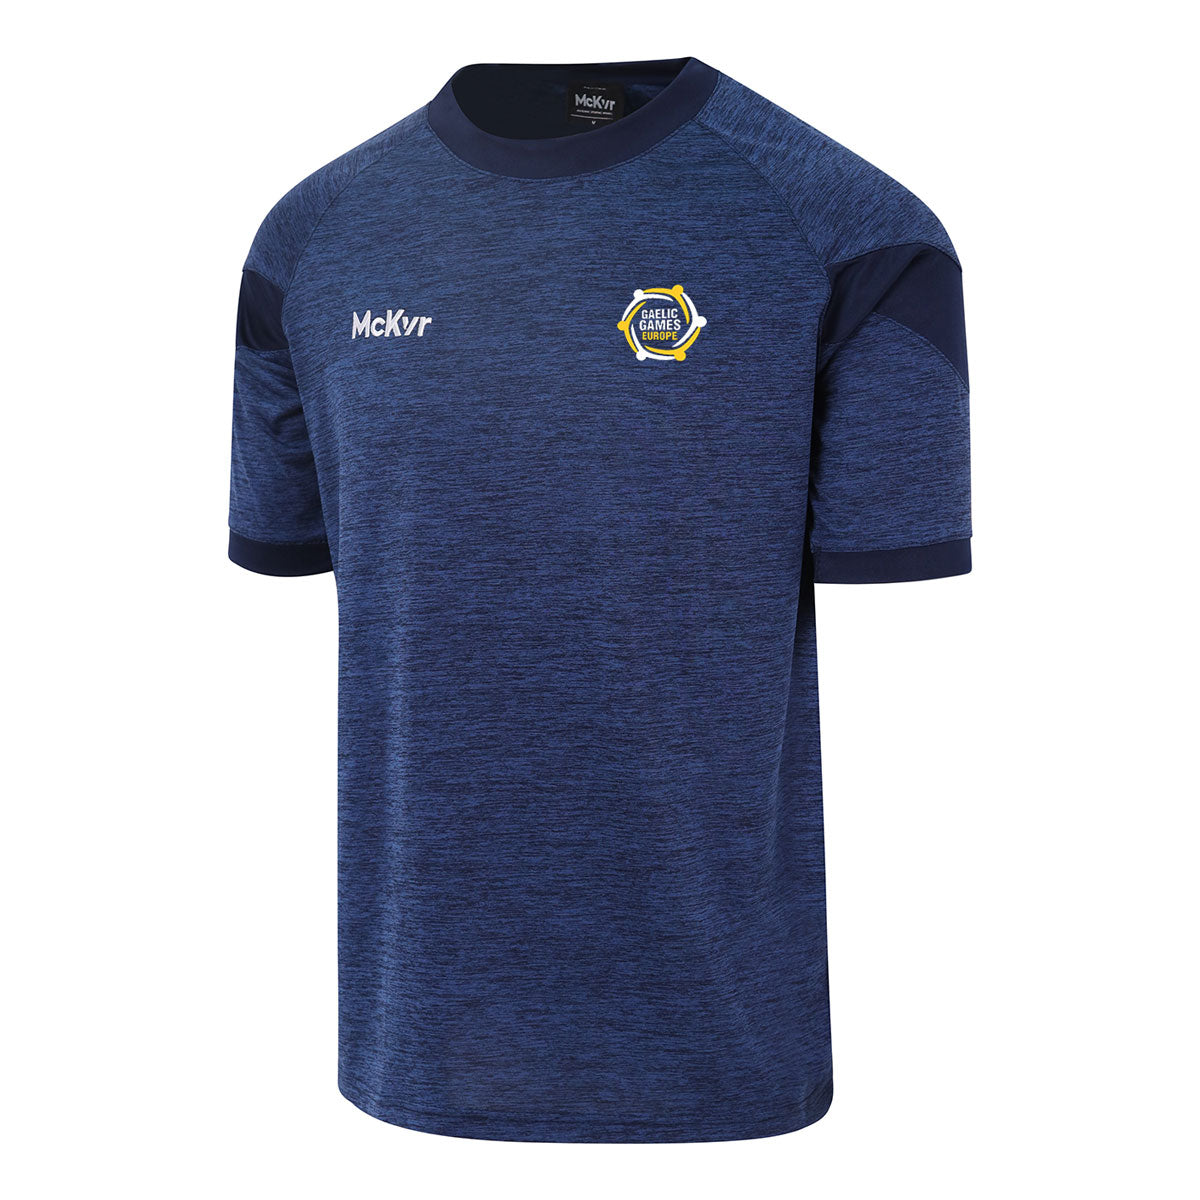 Mc Keever Gaelic Games Europe Core 22 T-Shirt - Youth - Navy